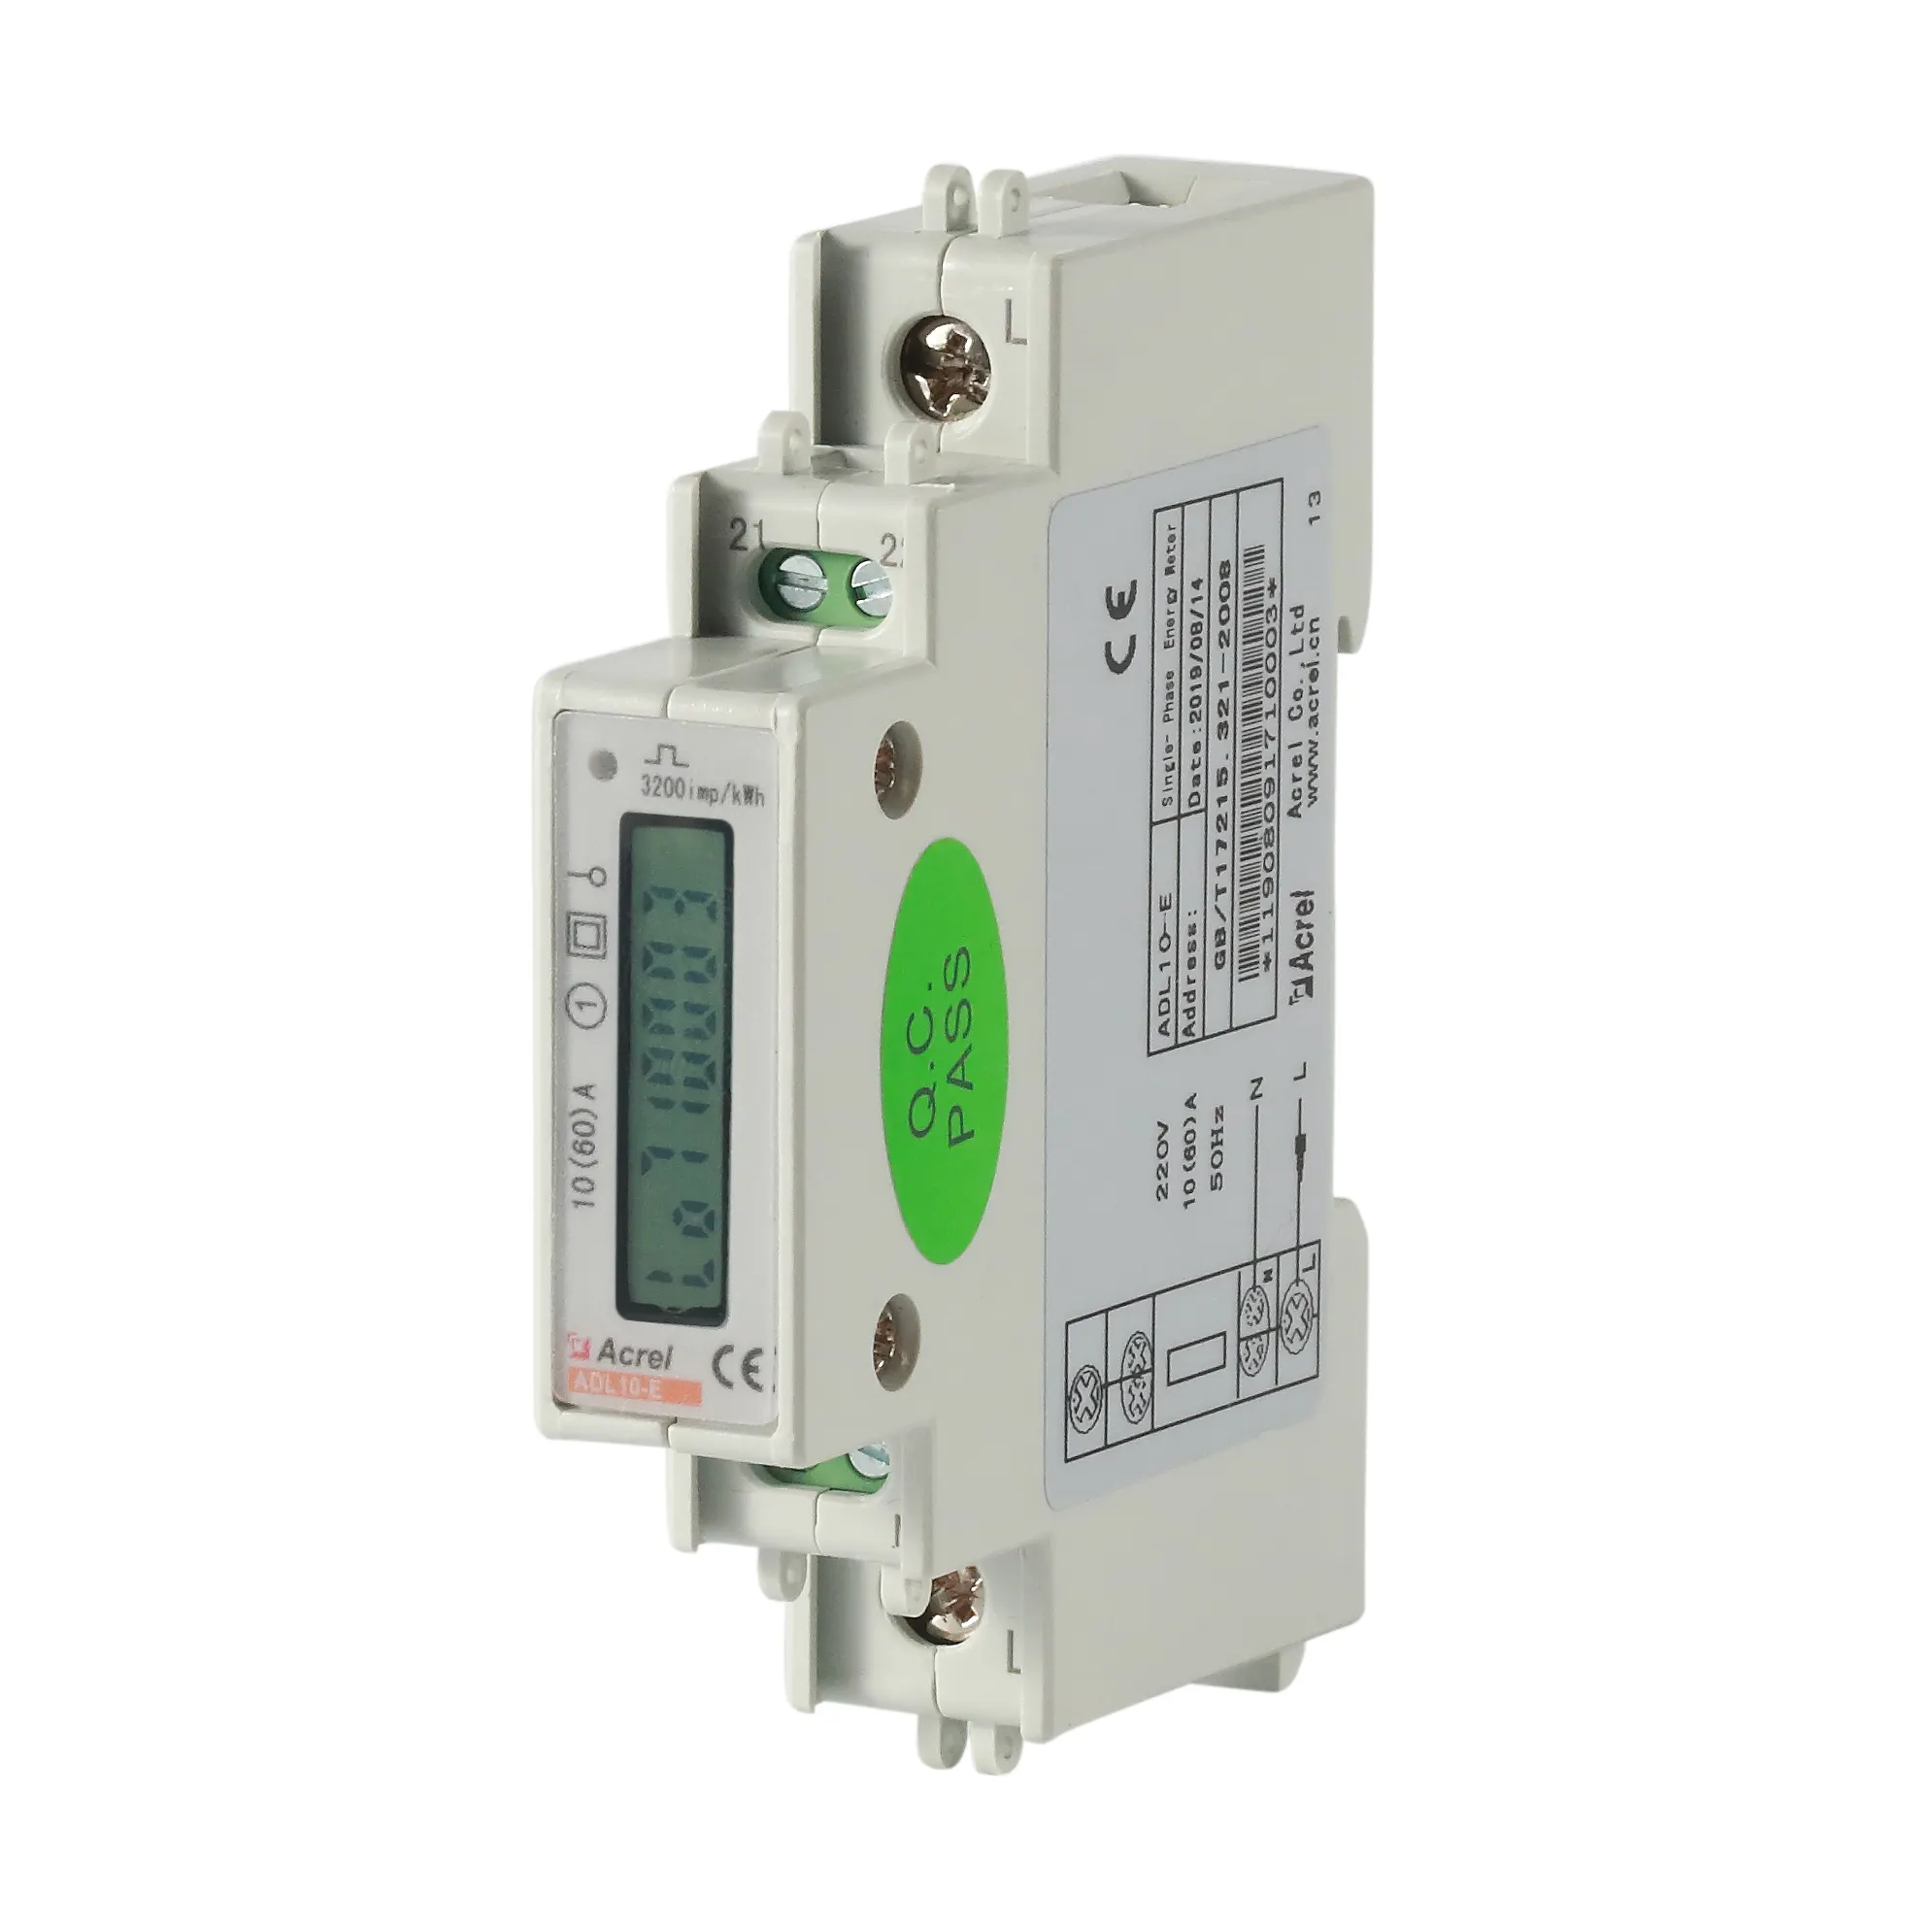 Acrel ADL10-E/C 1 phase energy meter max 60A direct connect RS485 communication